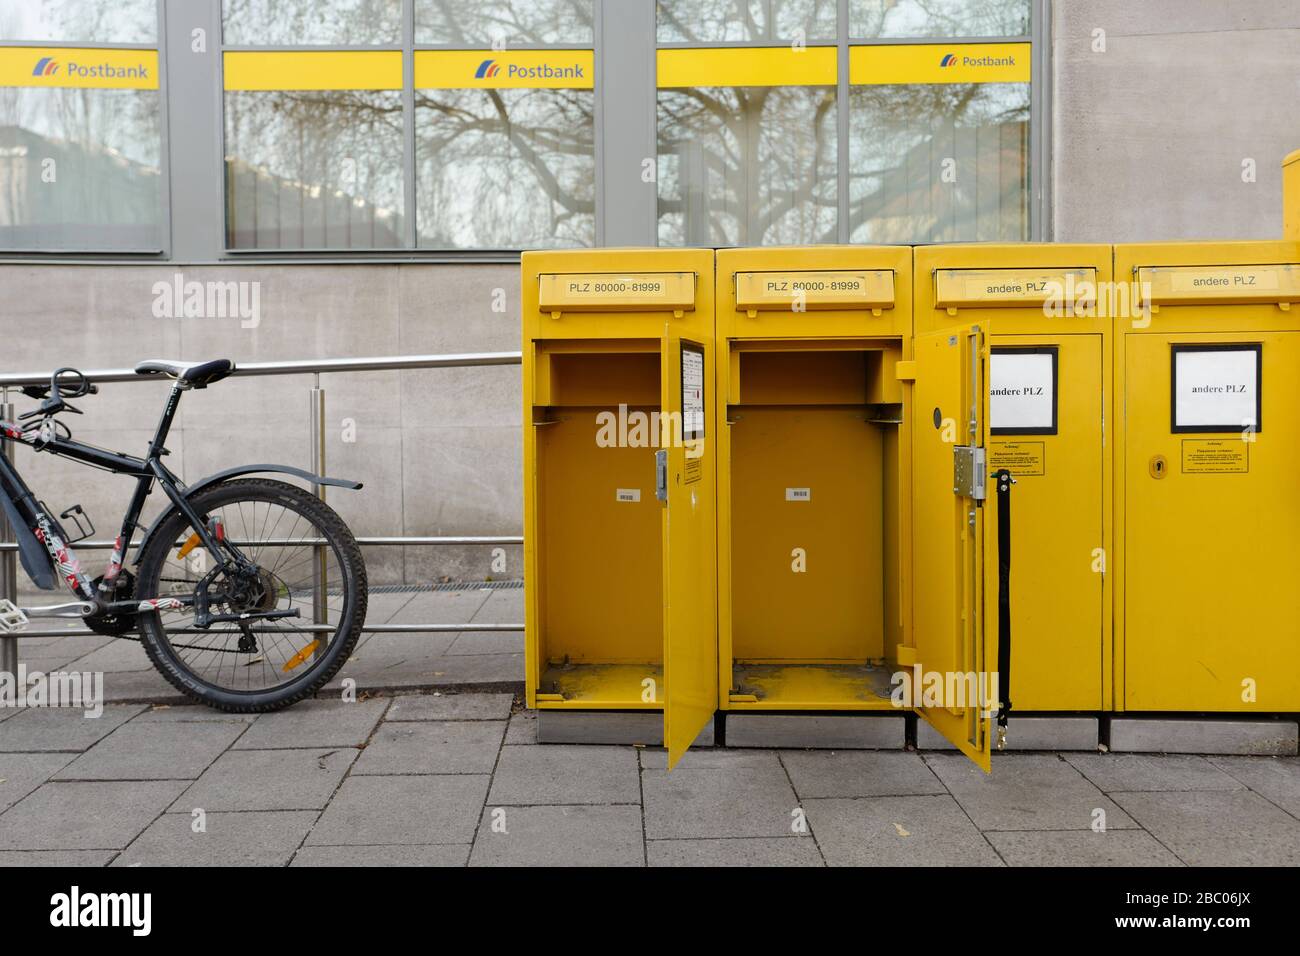 Christmas mail: At the post office branch on Goetheplatz, the mailboxes are emptied more often during the Christmas season. [automated translation] Stock Photo